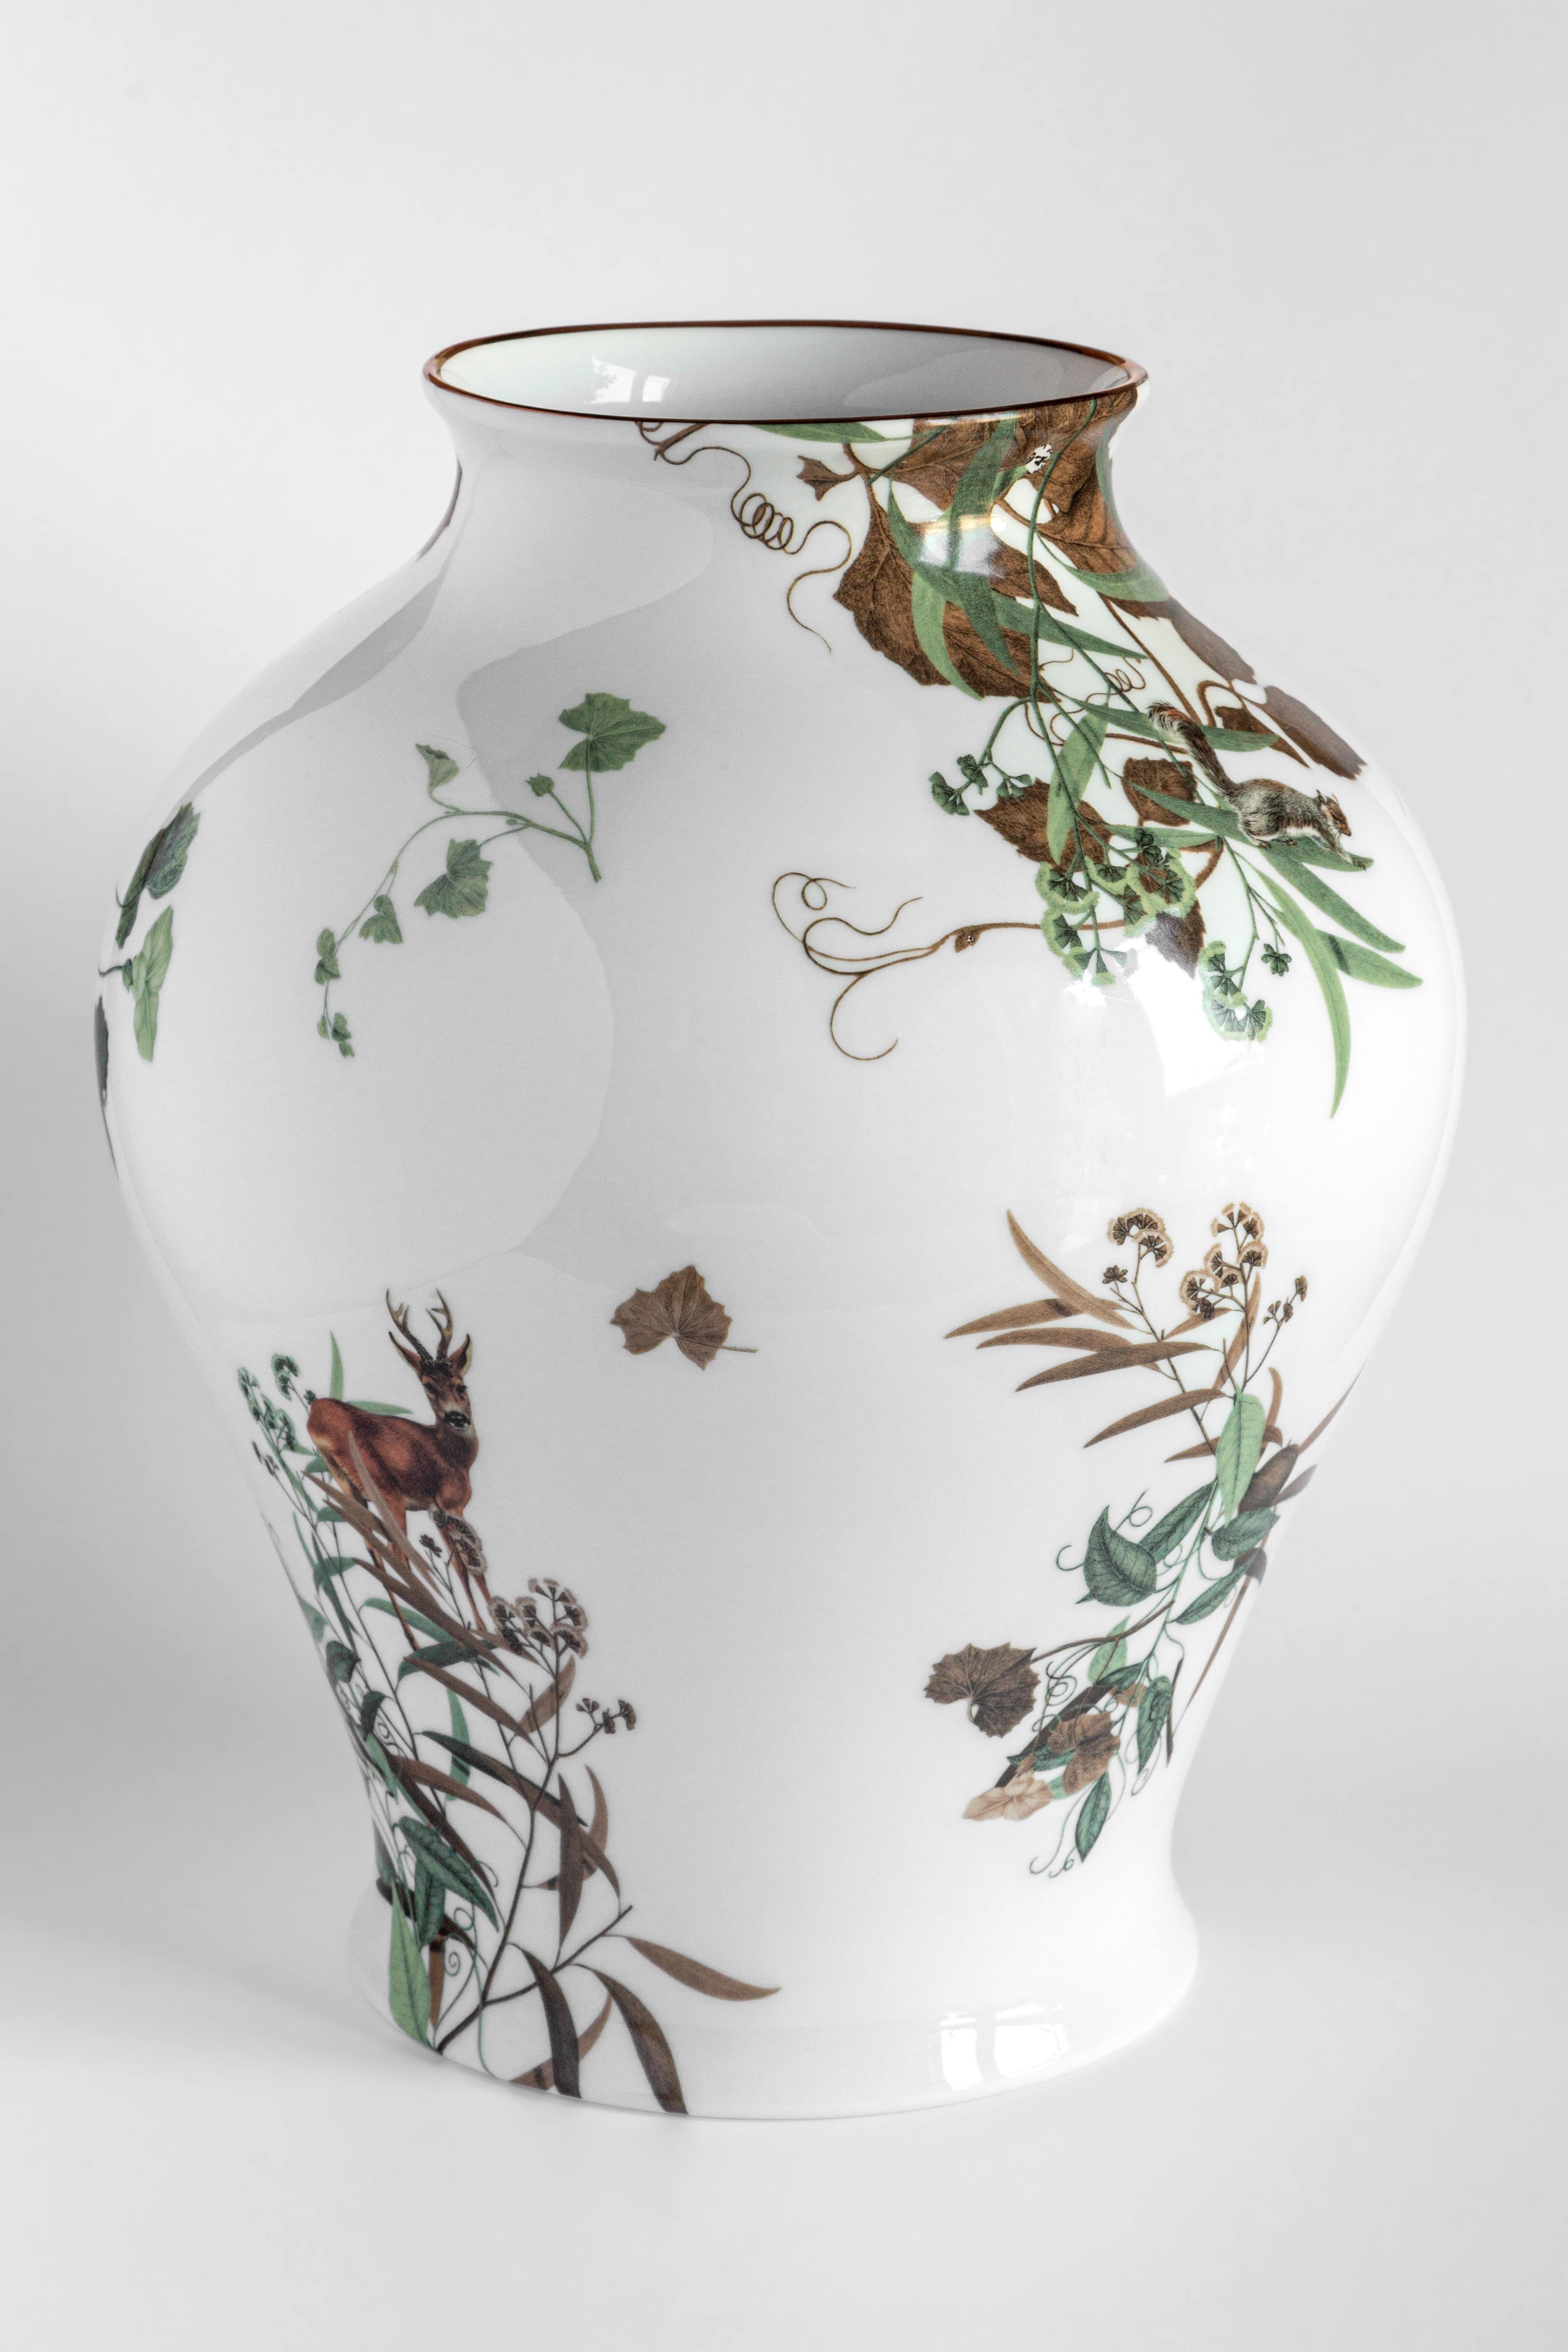 The Classic design of this porcelain vase comes back to life with retro decorations with a contemporary flavor. This vase is embellished with animals and branches inspired by the fauna and vegetation of the Italian/French Mont Blanc, in the Alpine